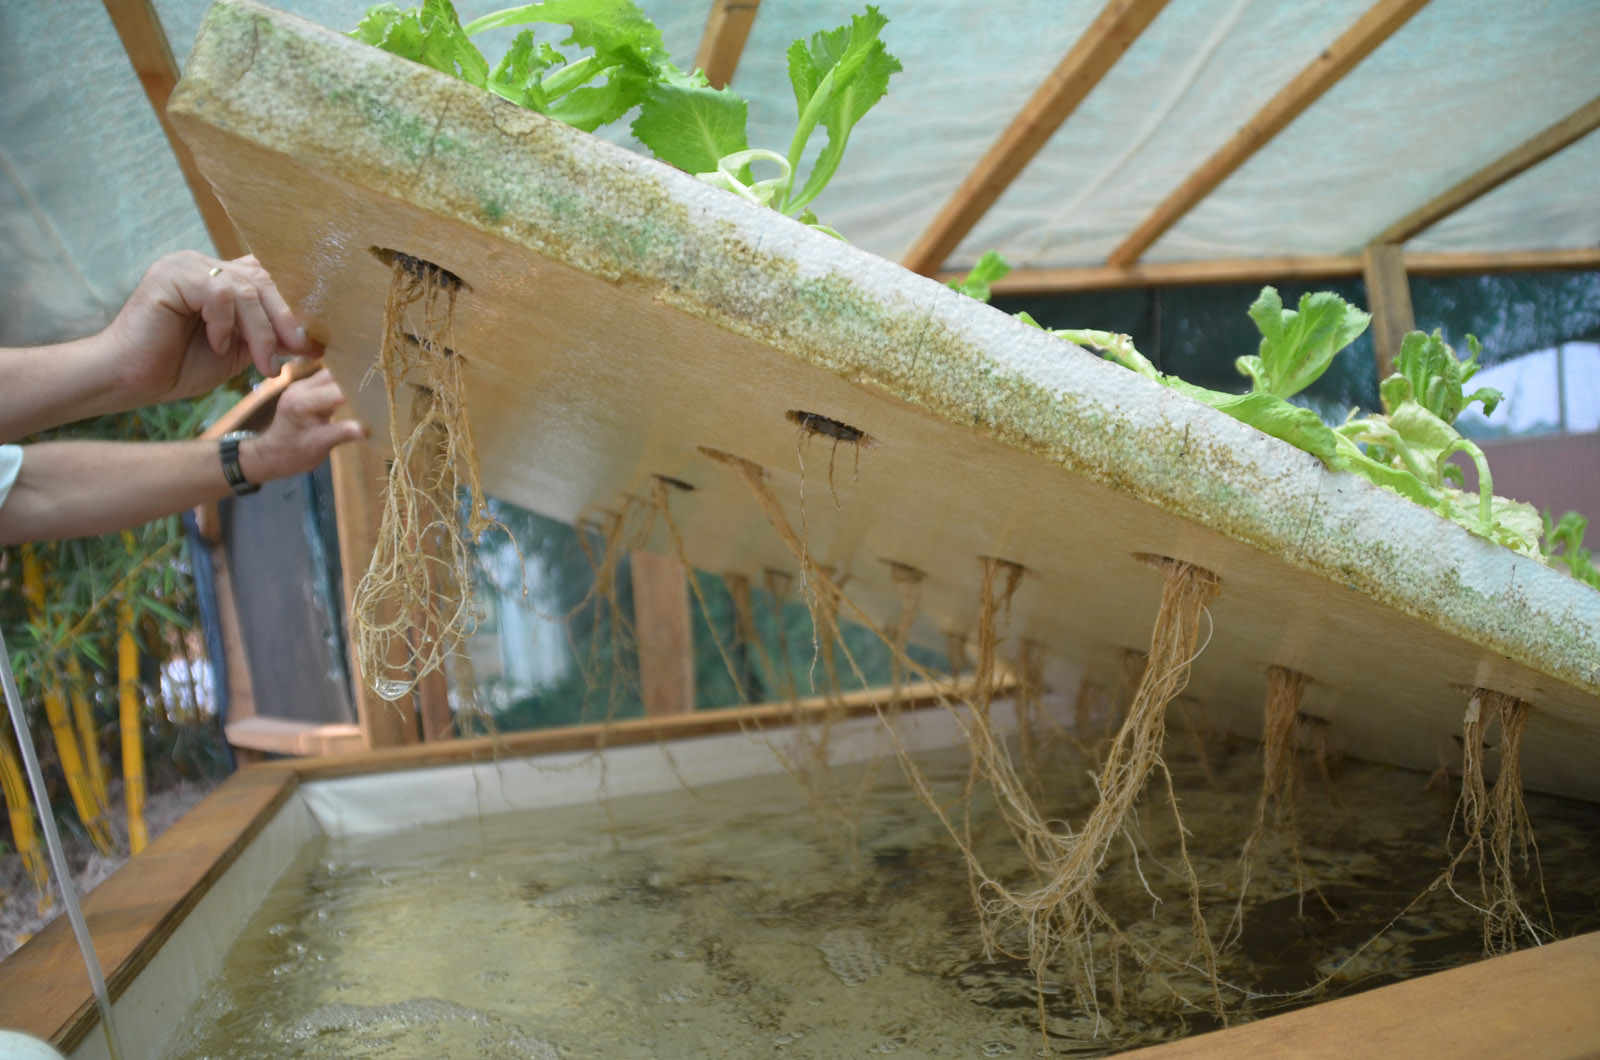 Aquaponics: The plants receive the nutrients through the water.